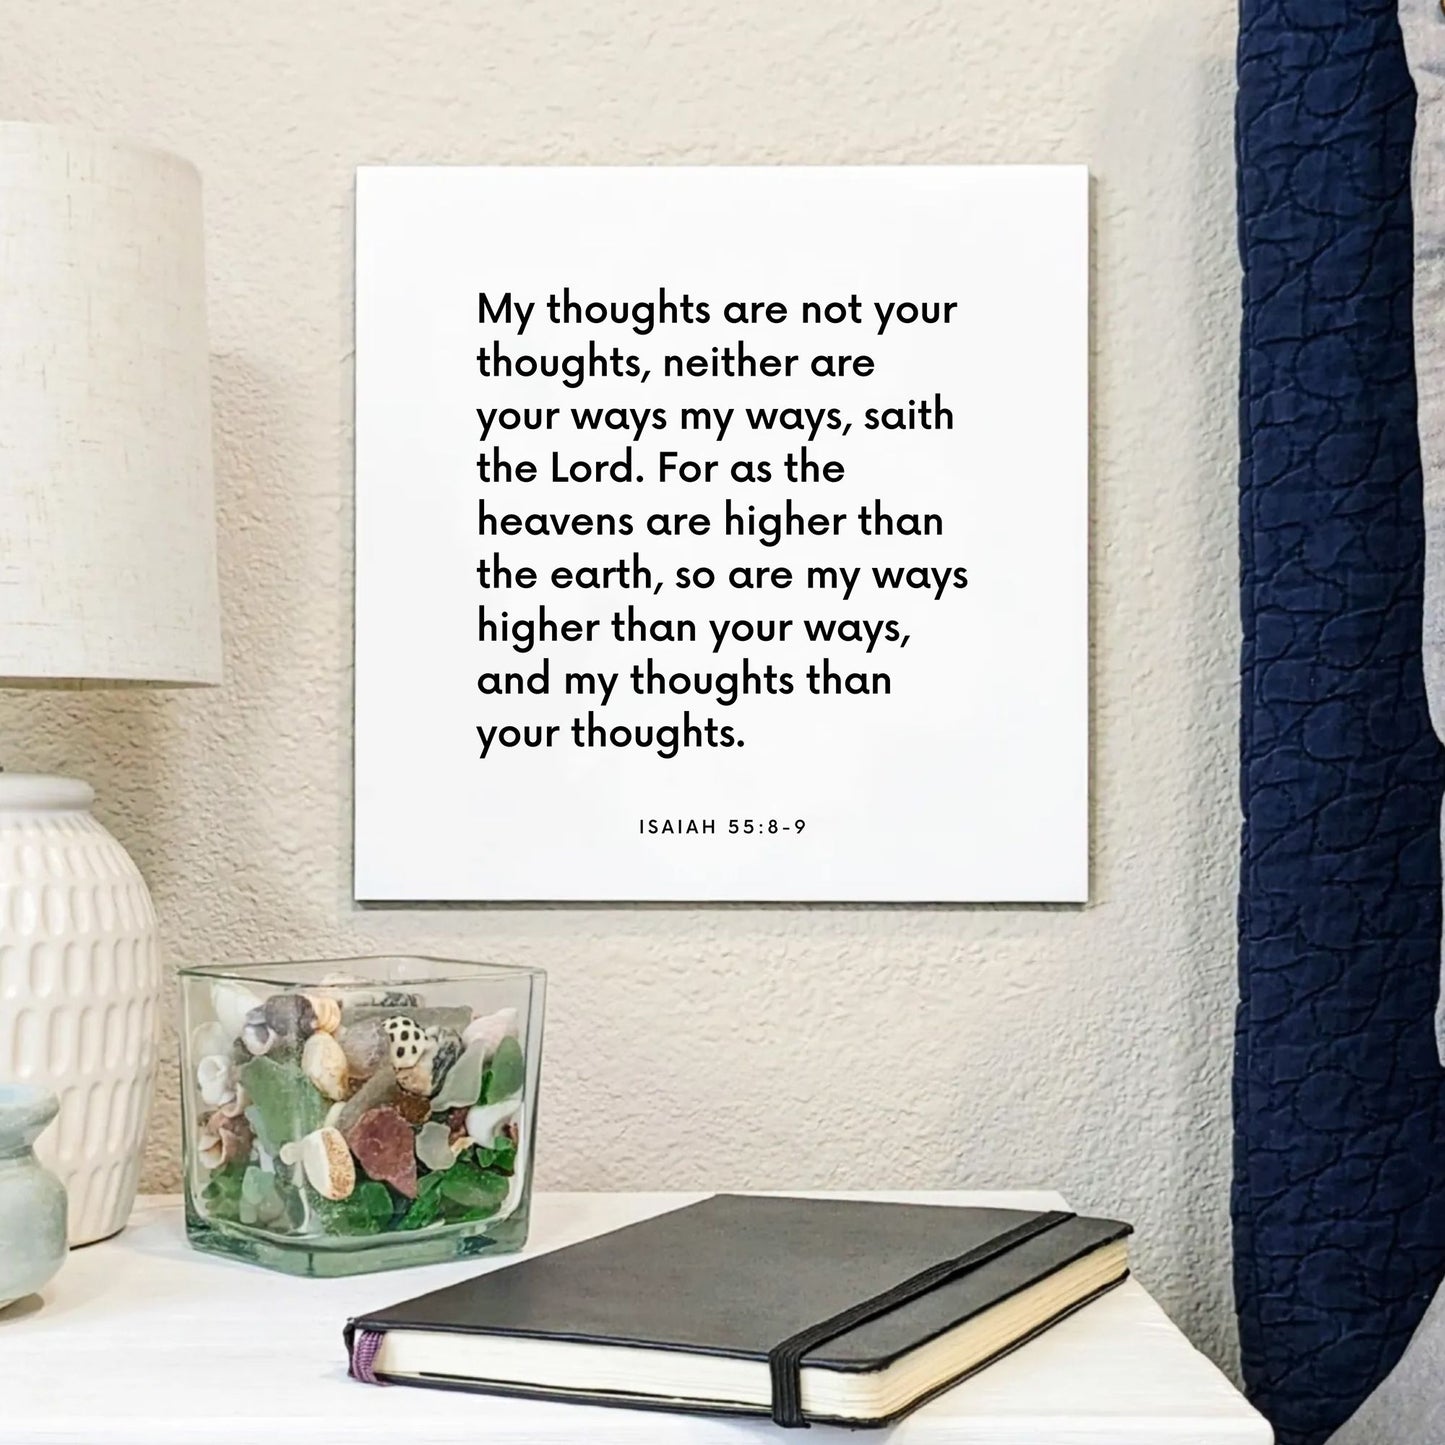 Bedside mouting of the scripture tile for Isaiah 55:8-9 - "My thoughts are not your thoughts, neither your ways my ways"